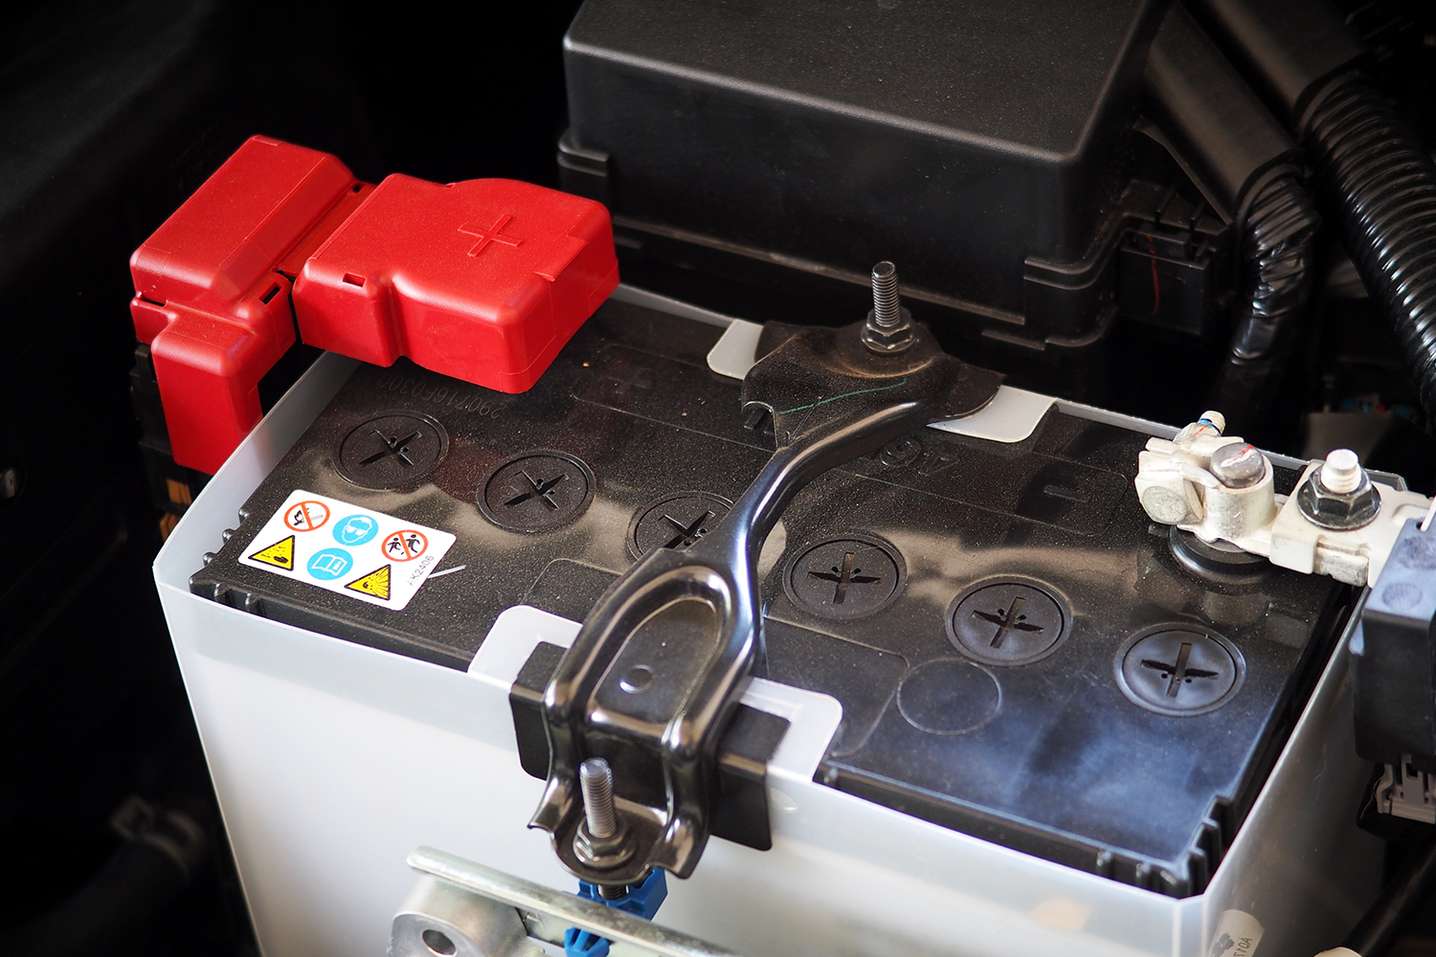  What to Do if Your Car Battery Dies